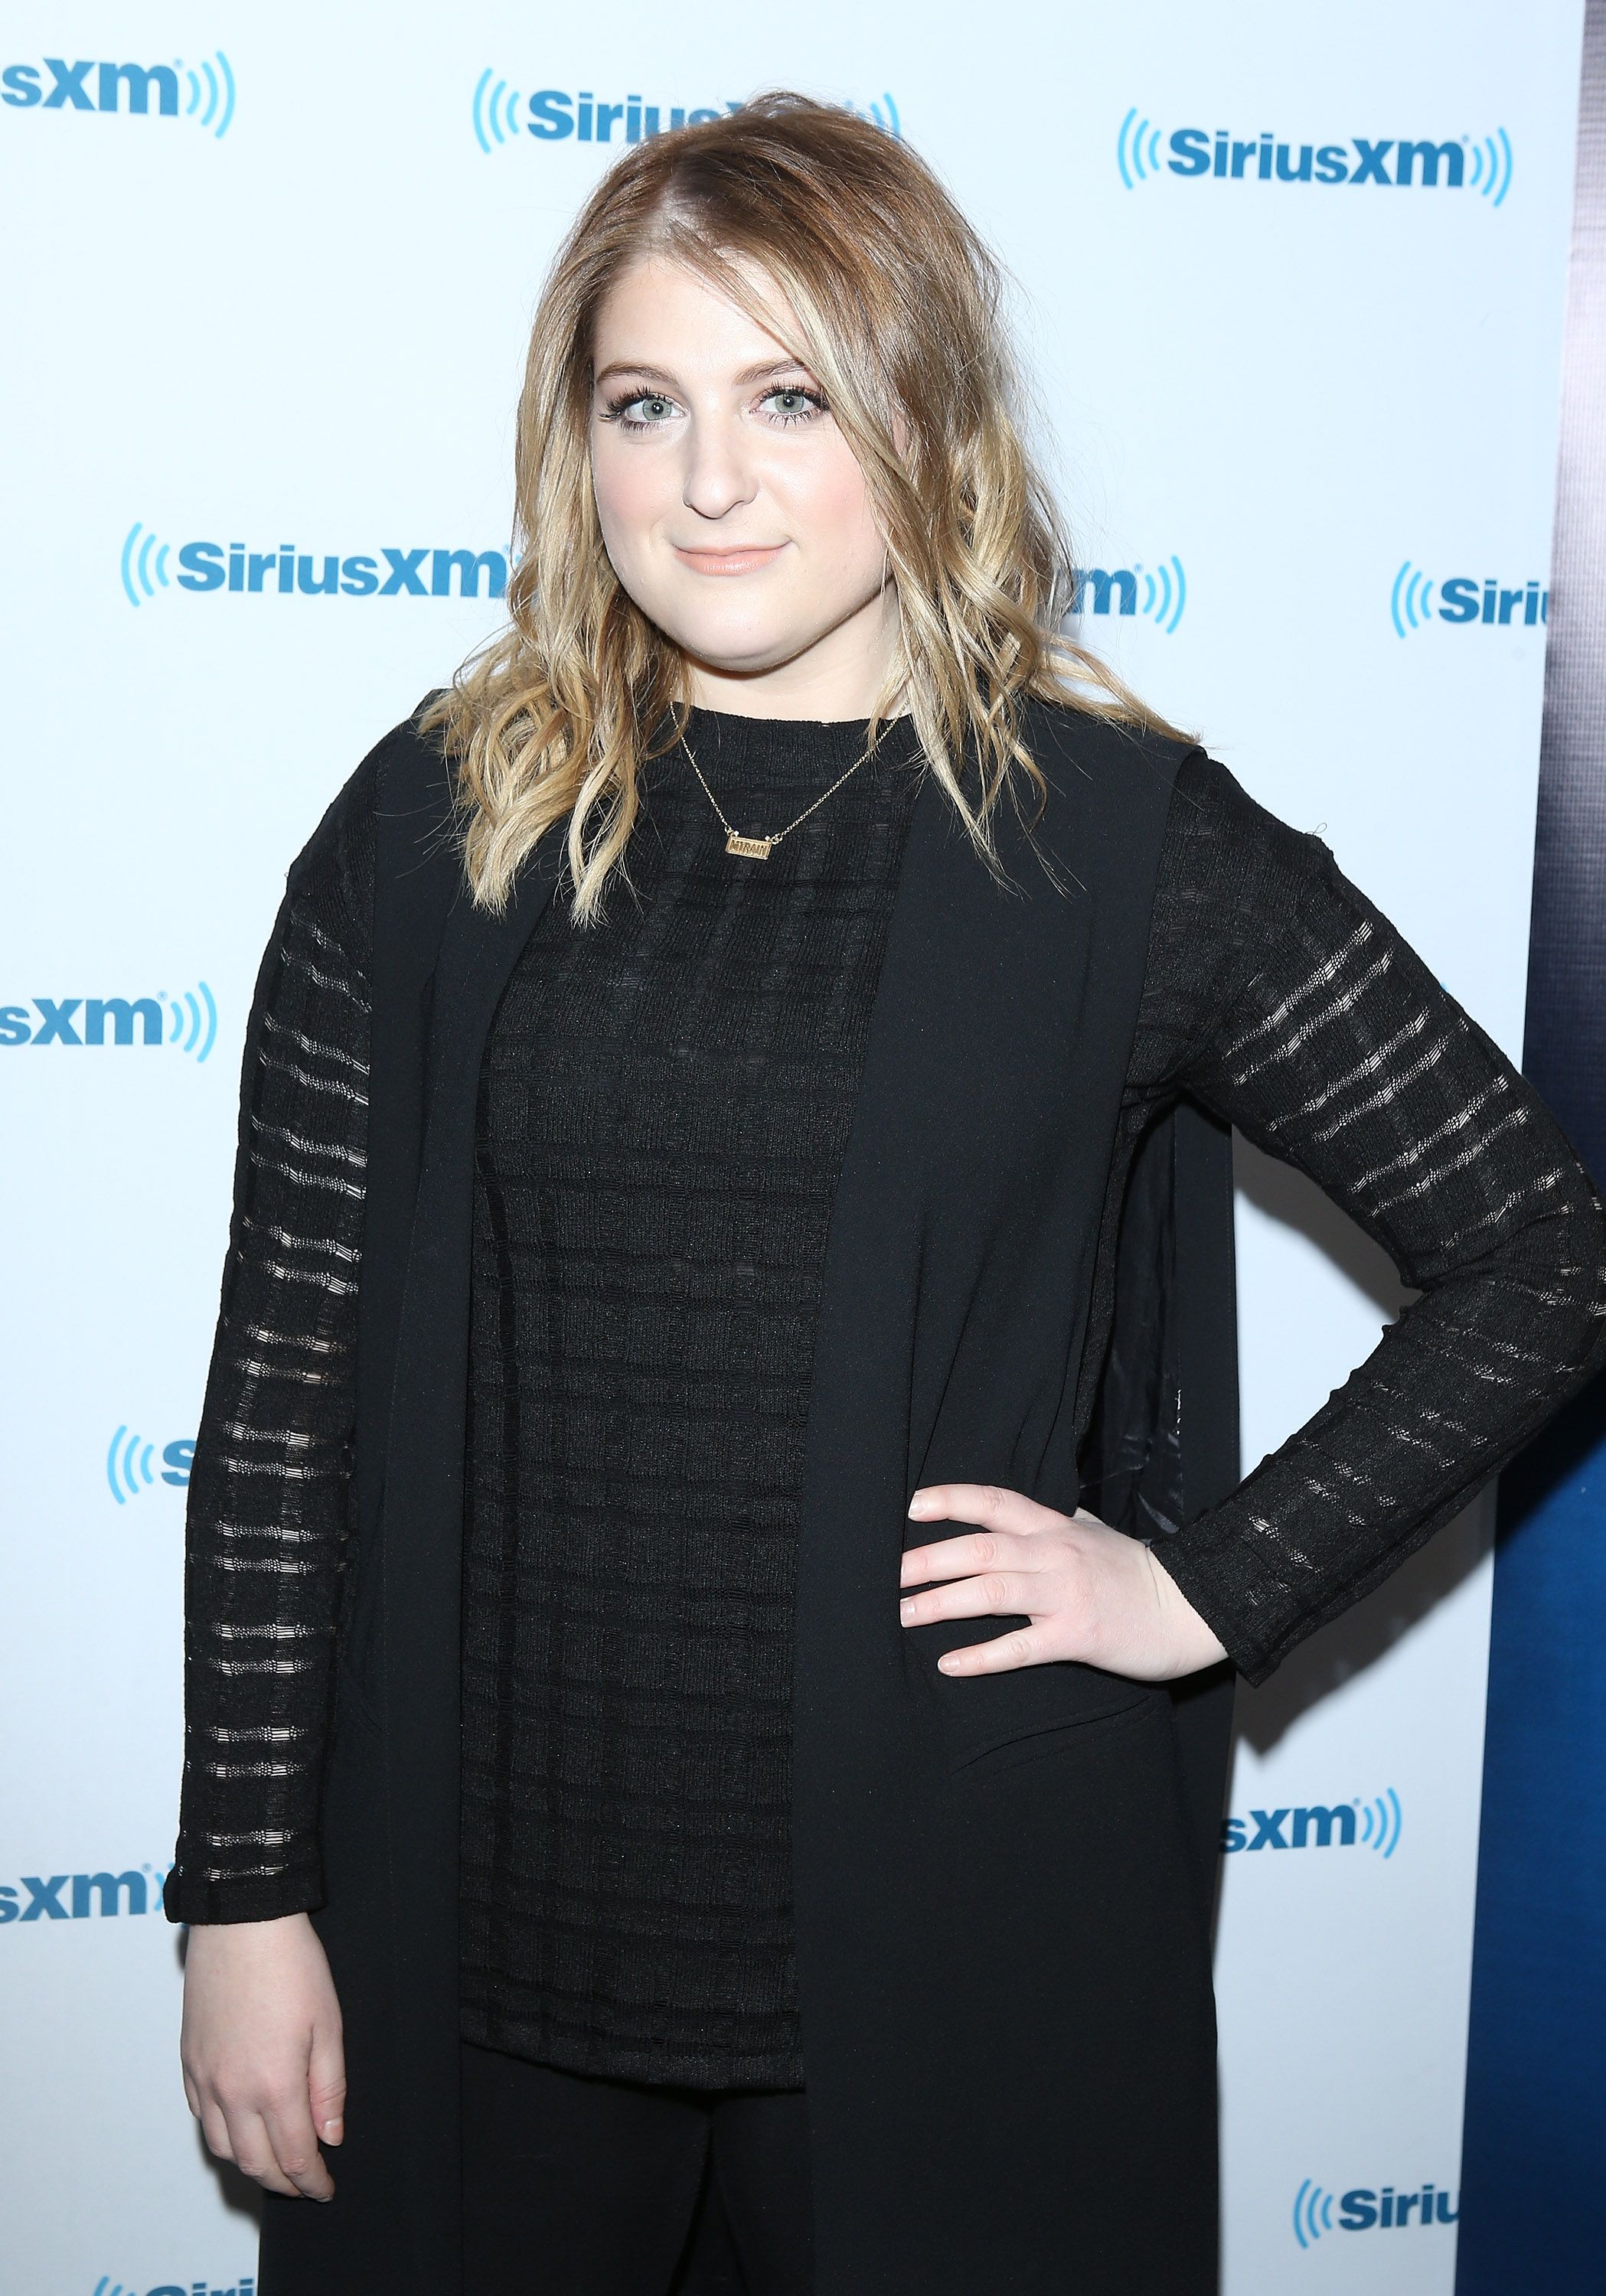 Meghan Trainor at the SiriusXM Hits 1's The Morning Mash Up broadcast on February 11, 2016 | Photo: Getty Images